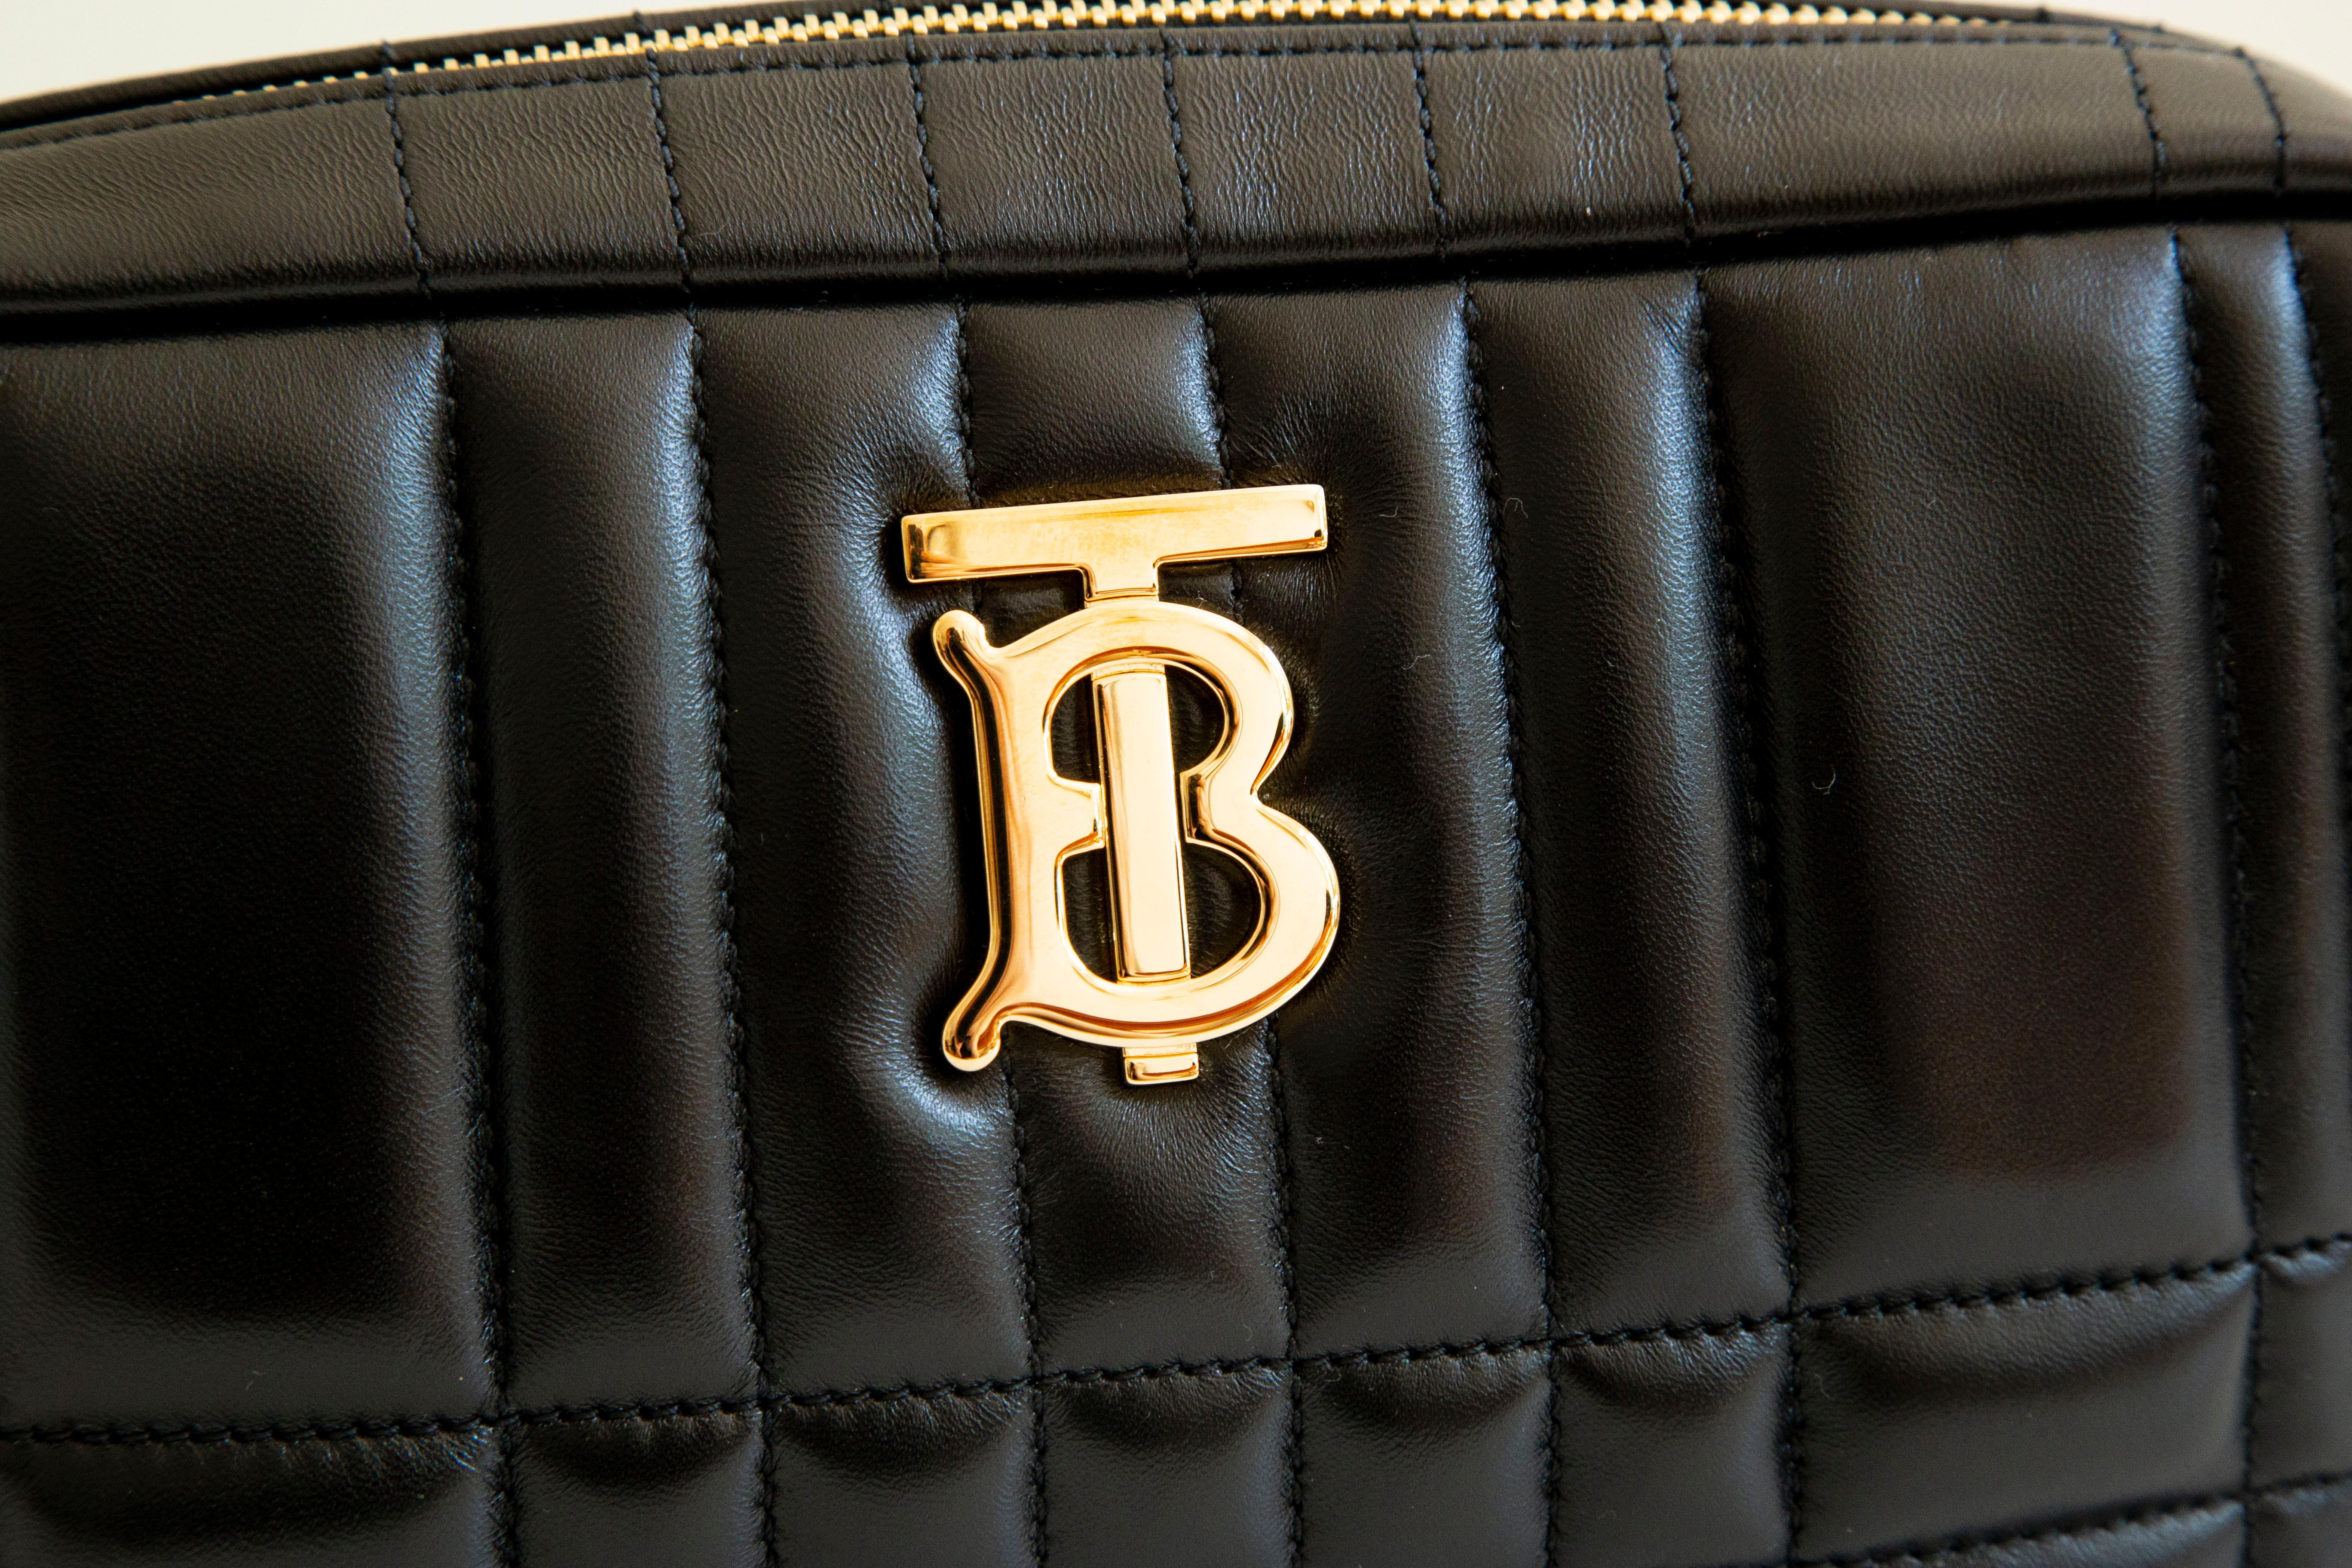 An authentic Burberry Small Lola camera bag, shoulder bag, crossbody bag. The bag features a soft calfskin black leather exterior and gold-toned hardware. The interior is lined with black fabric and there is one slip pocket inside. The interior,